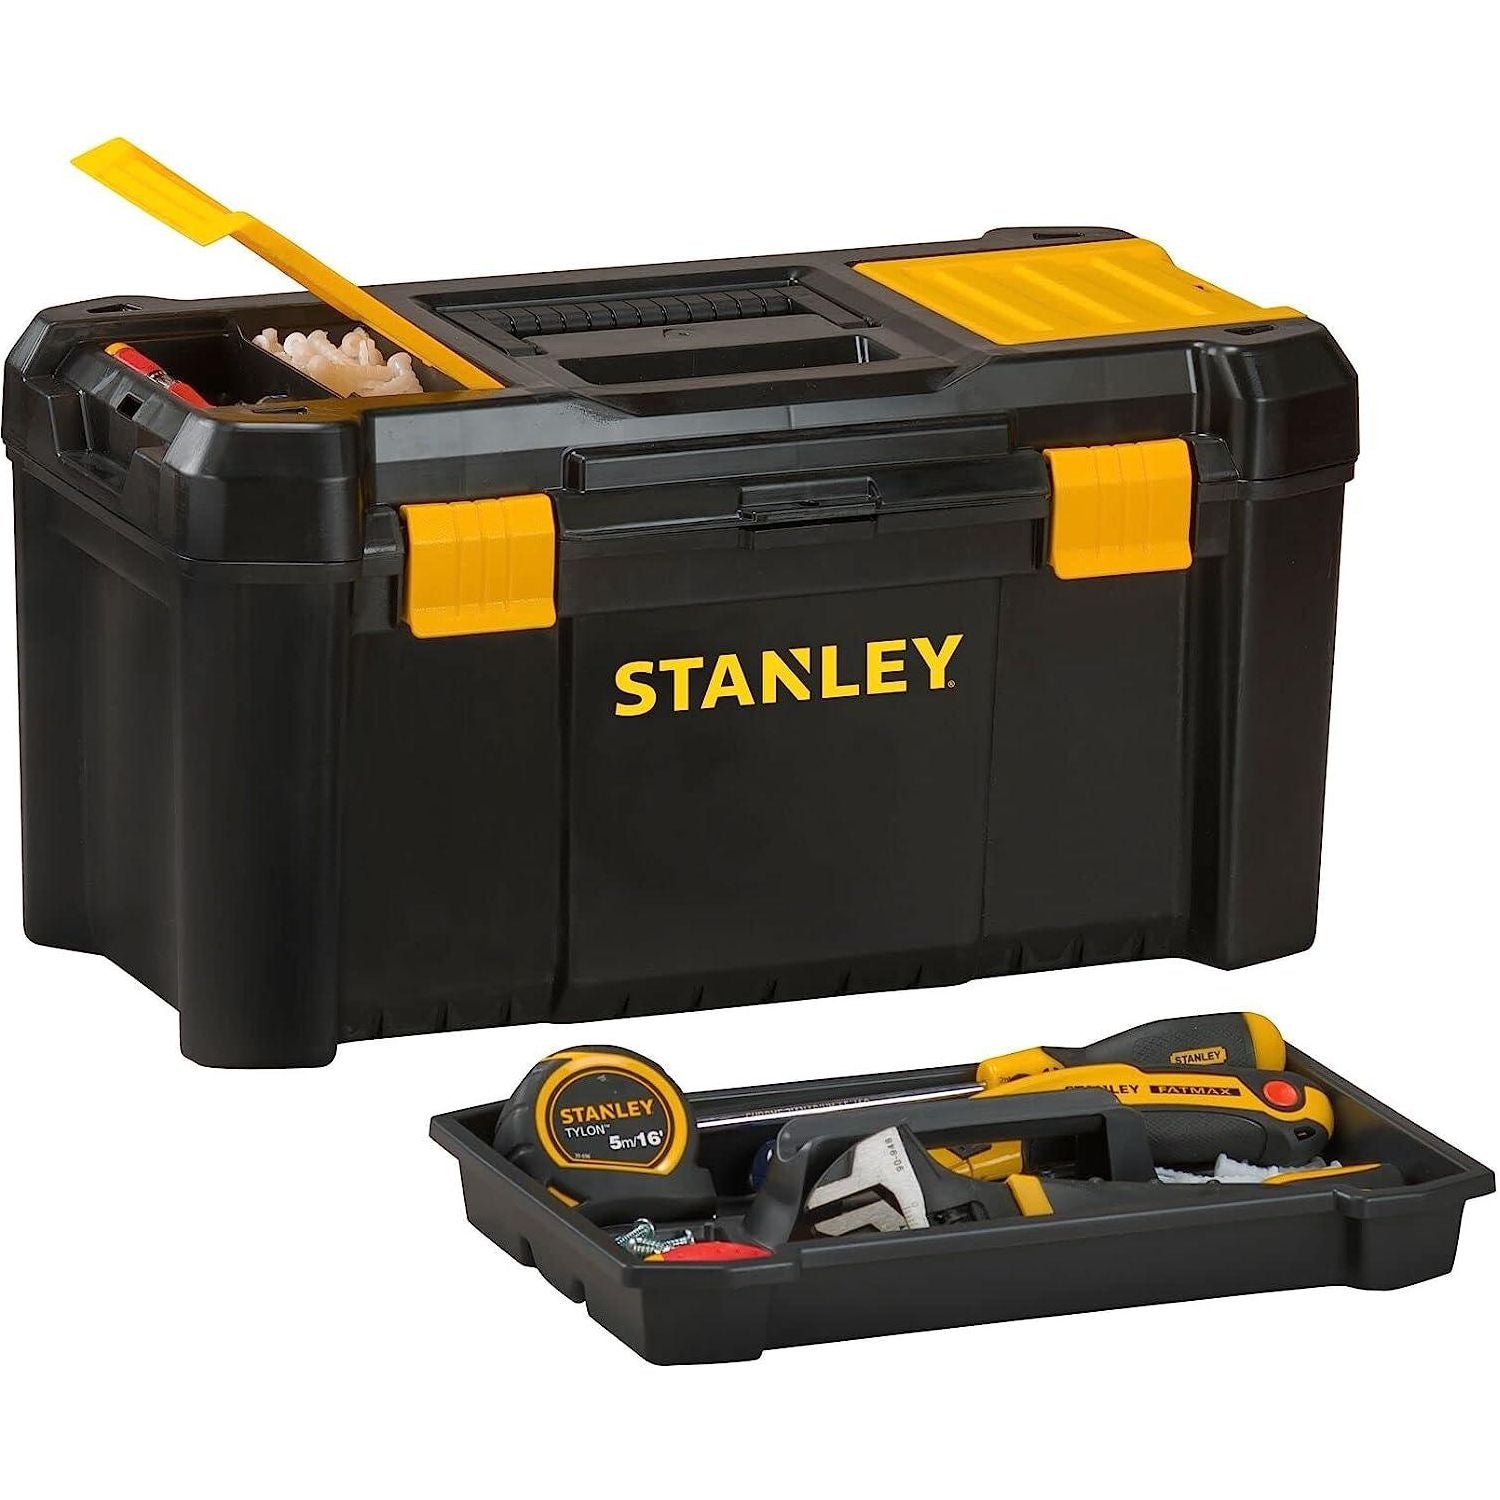 19 in. Plastic Portable Tool Box with Removable Tool Tray